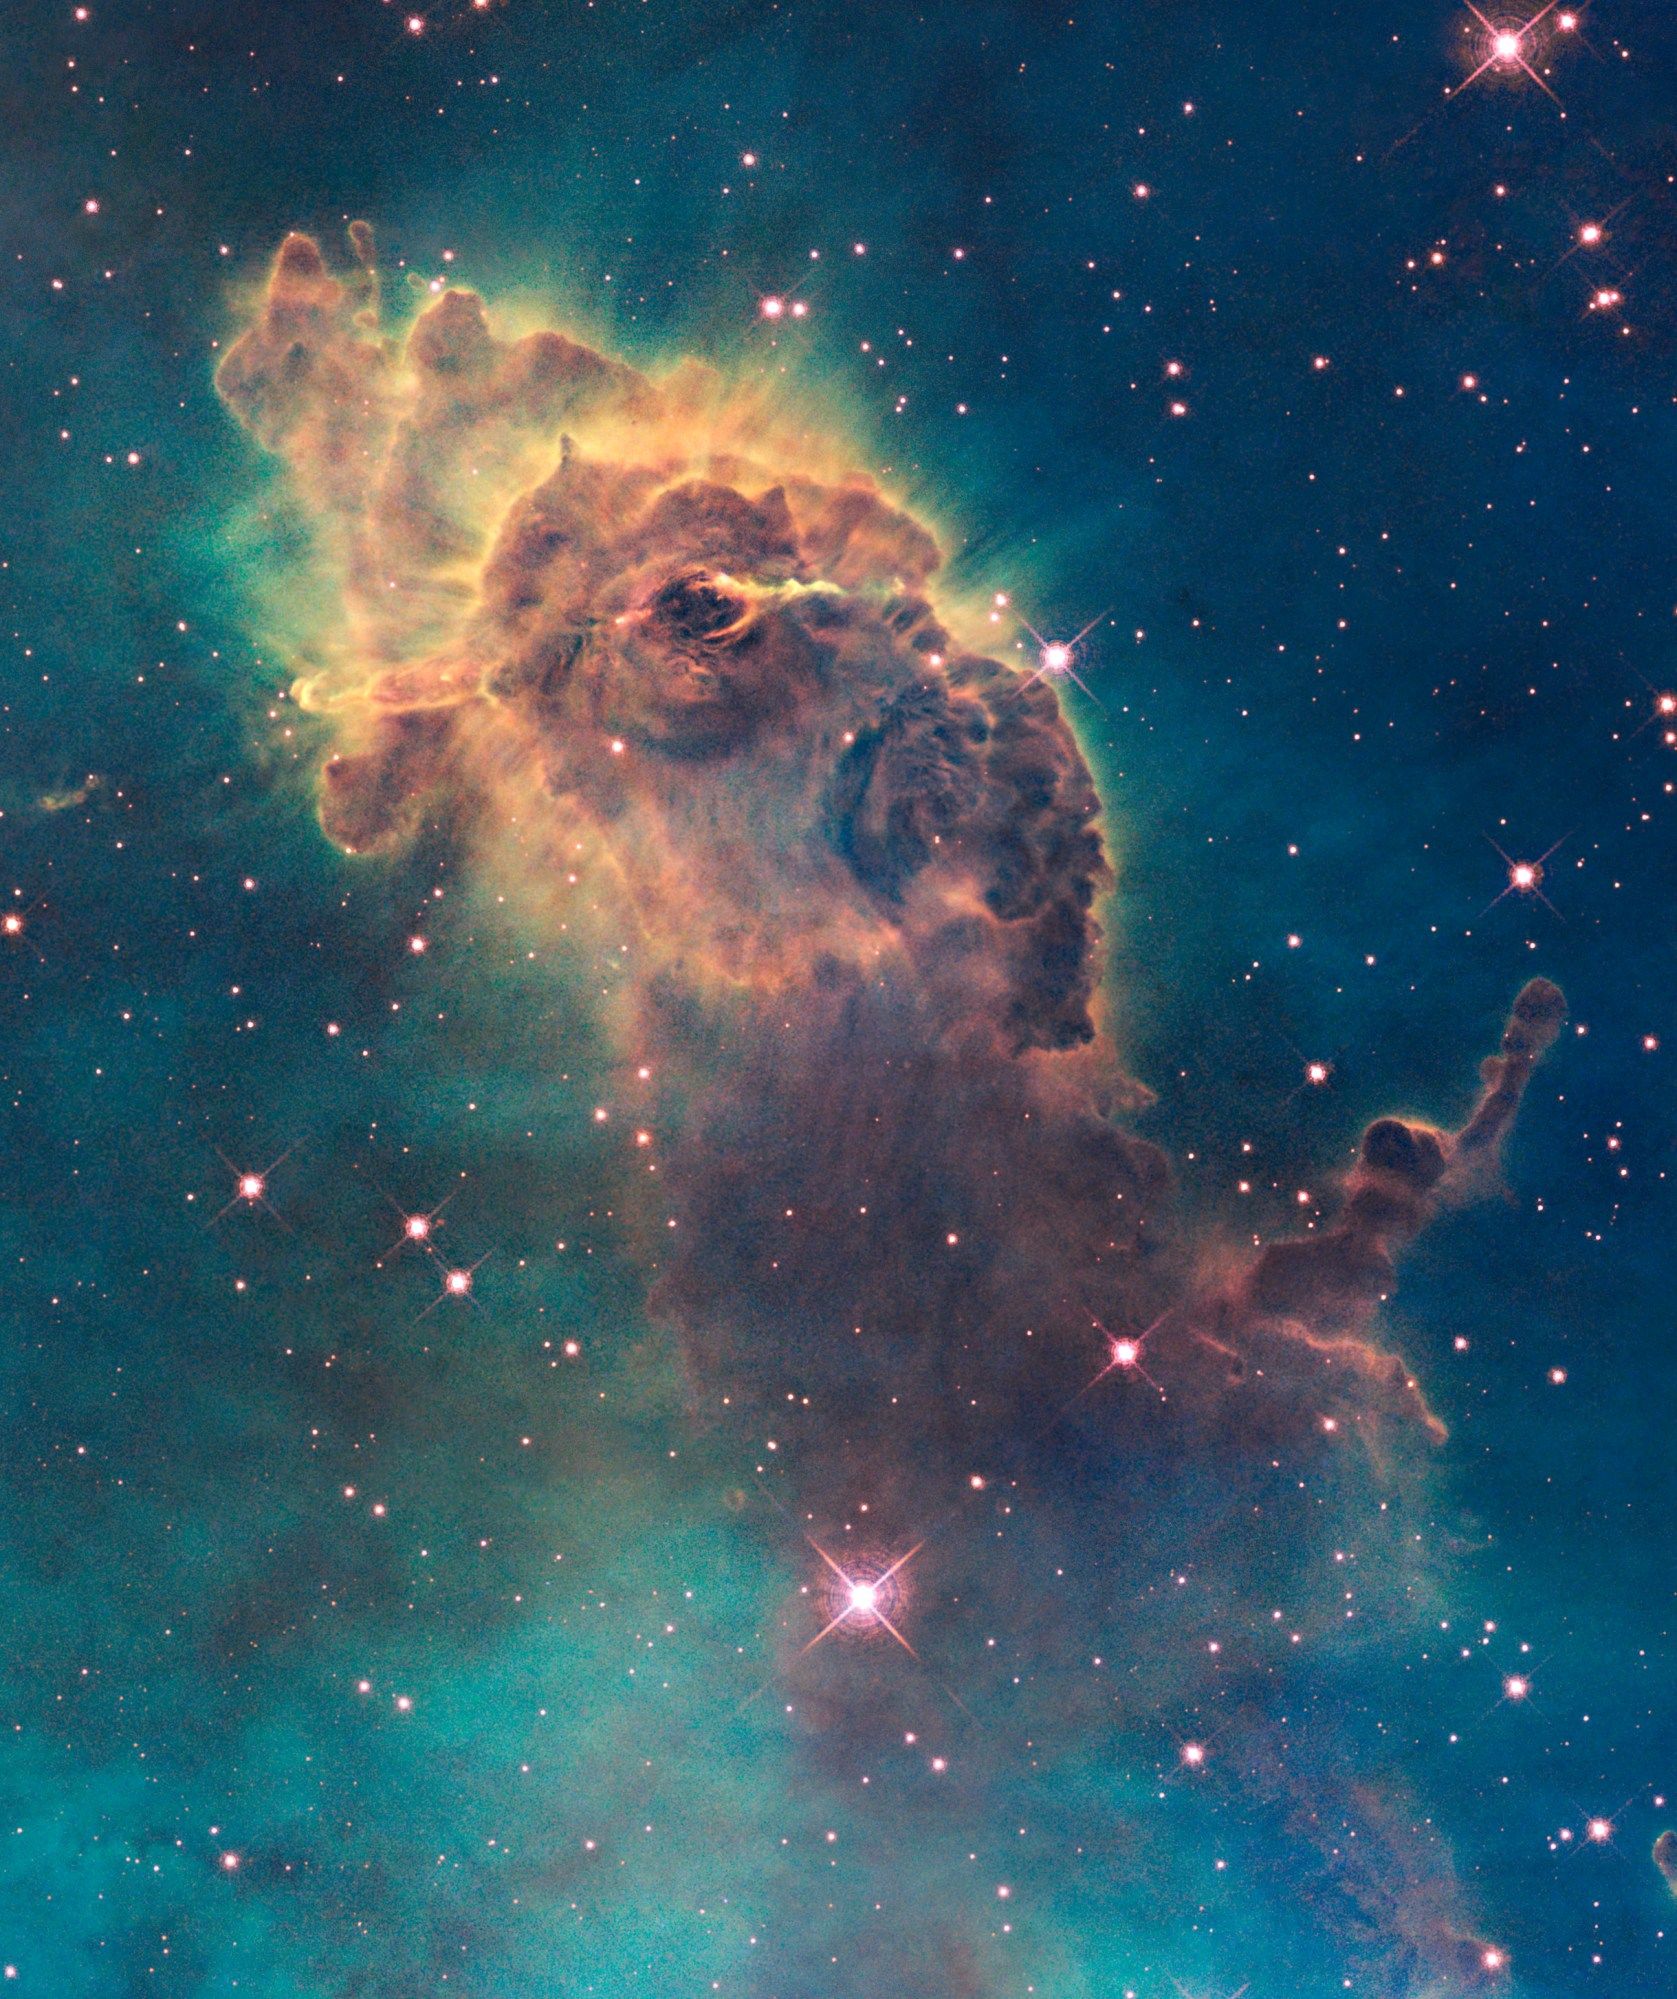 An orange and brown pillar of gas and dust rears up against a blue background dotted with pinkish stars. The pillar is brighter and more distinct toward the top and dimmer and more diffuse toward the bottom. Gas is streaming off the top of the pillar.